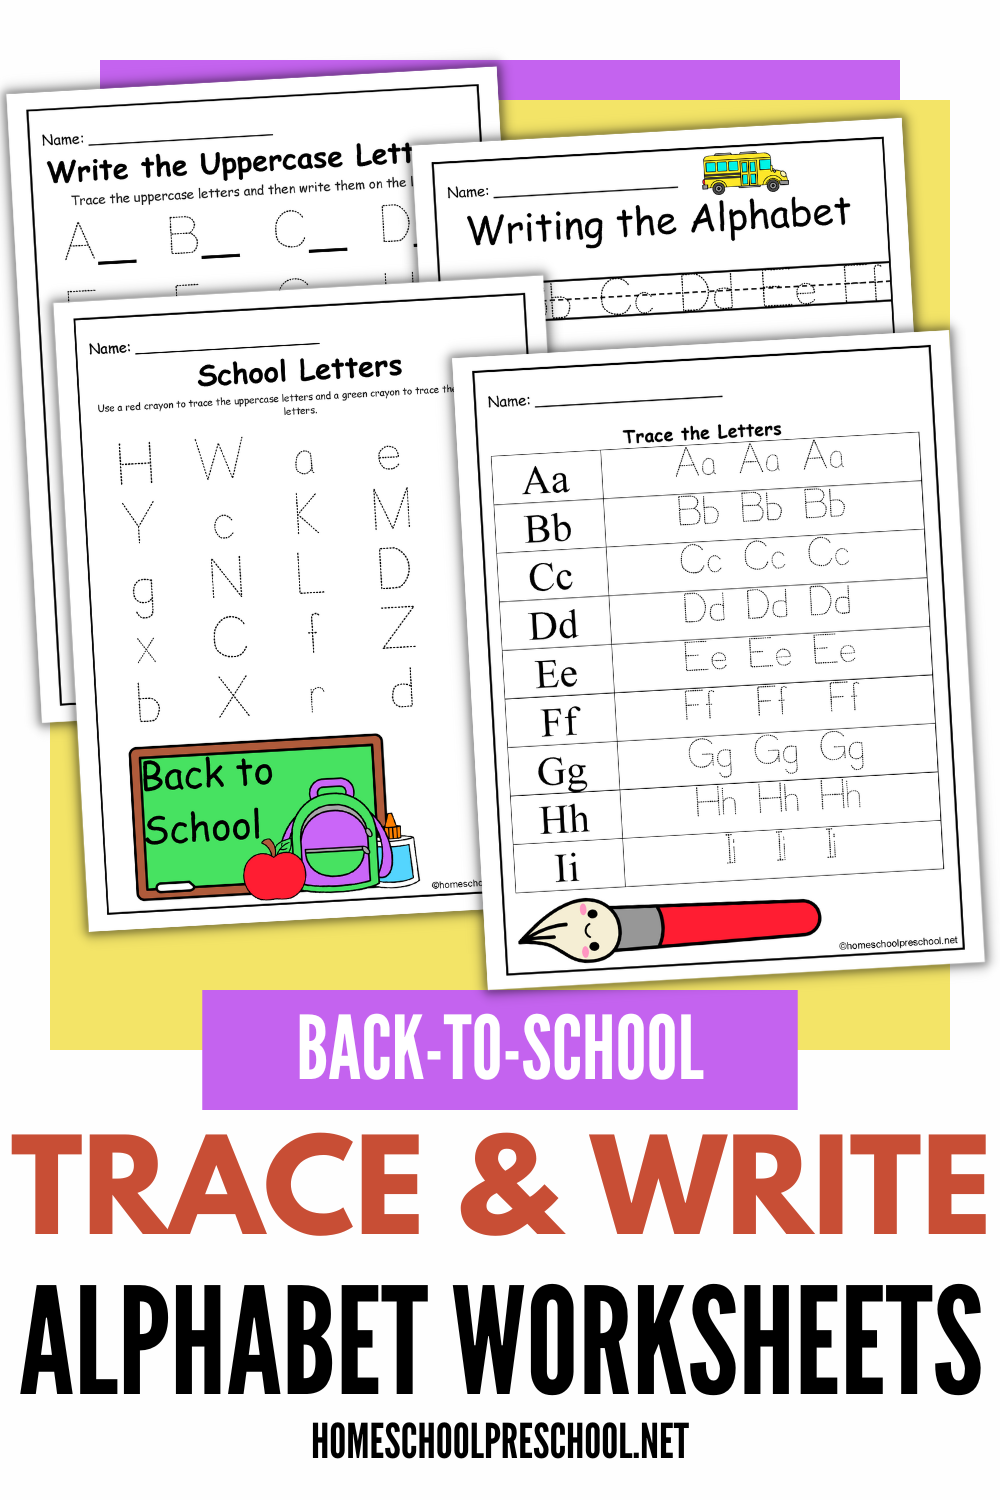 tracable-alphabet Trace and Write Alphabet Worksheets